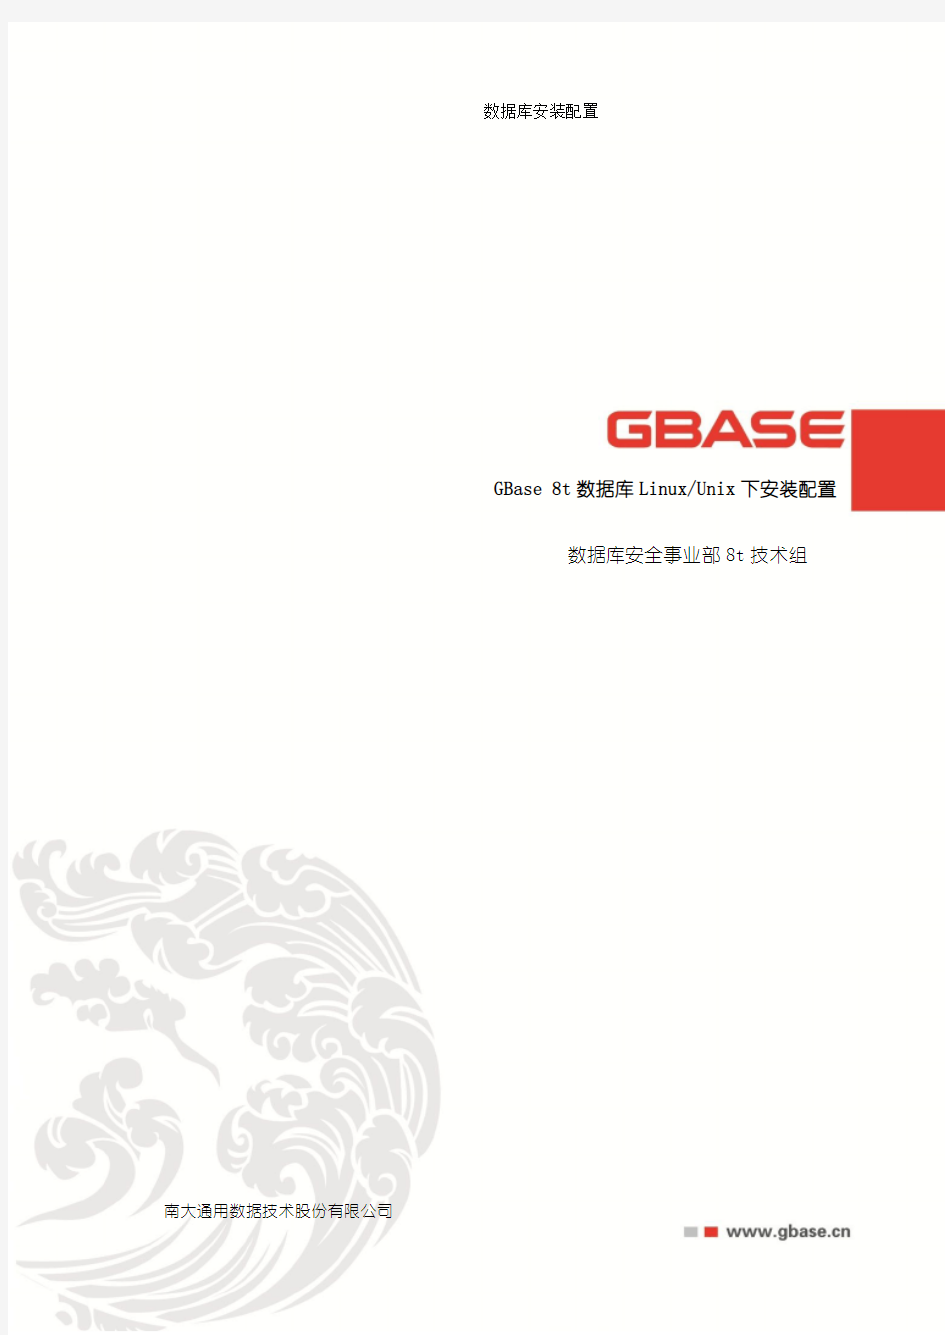 GBase8t安装配置(for linux and unix)